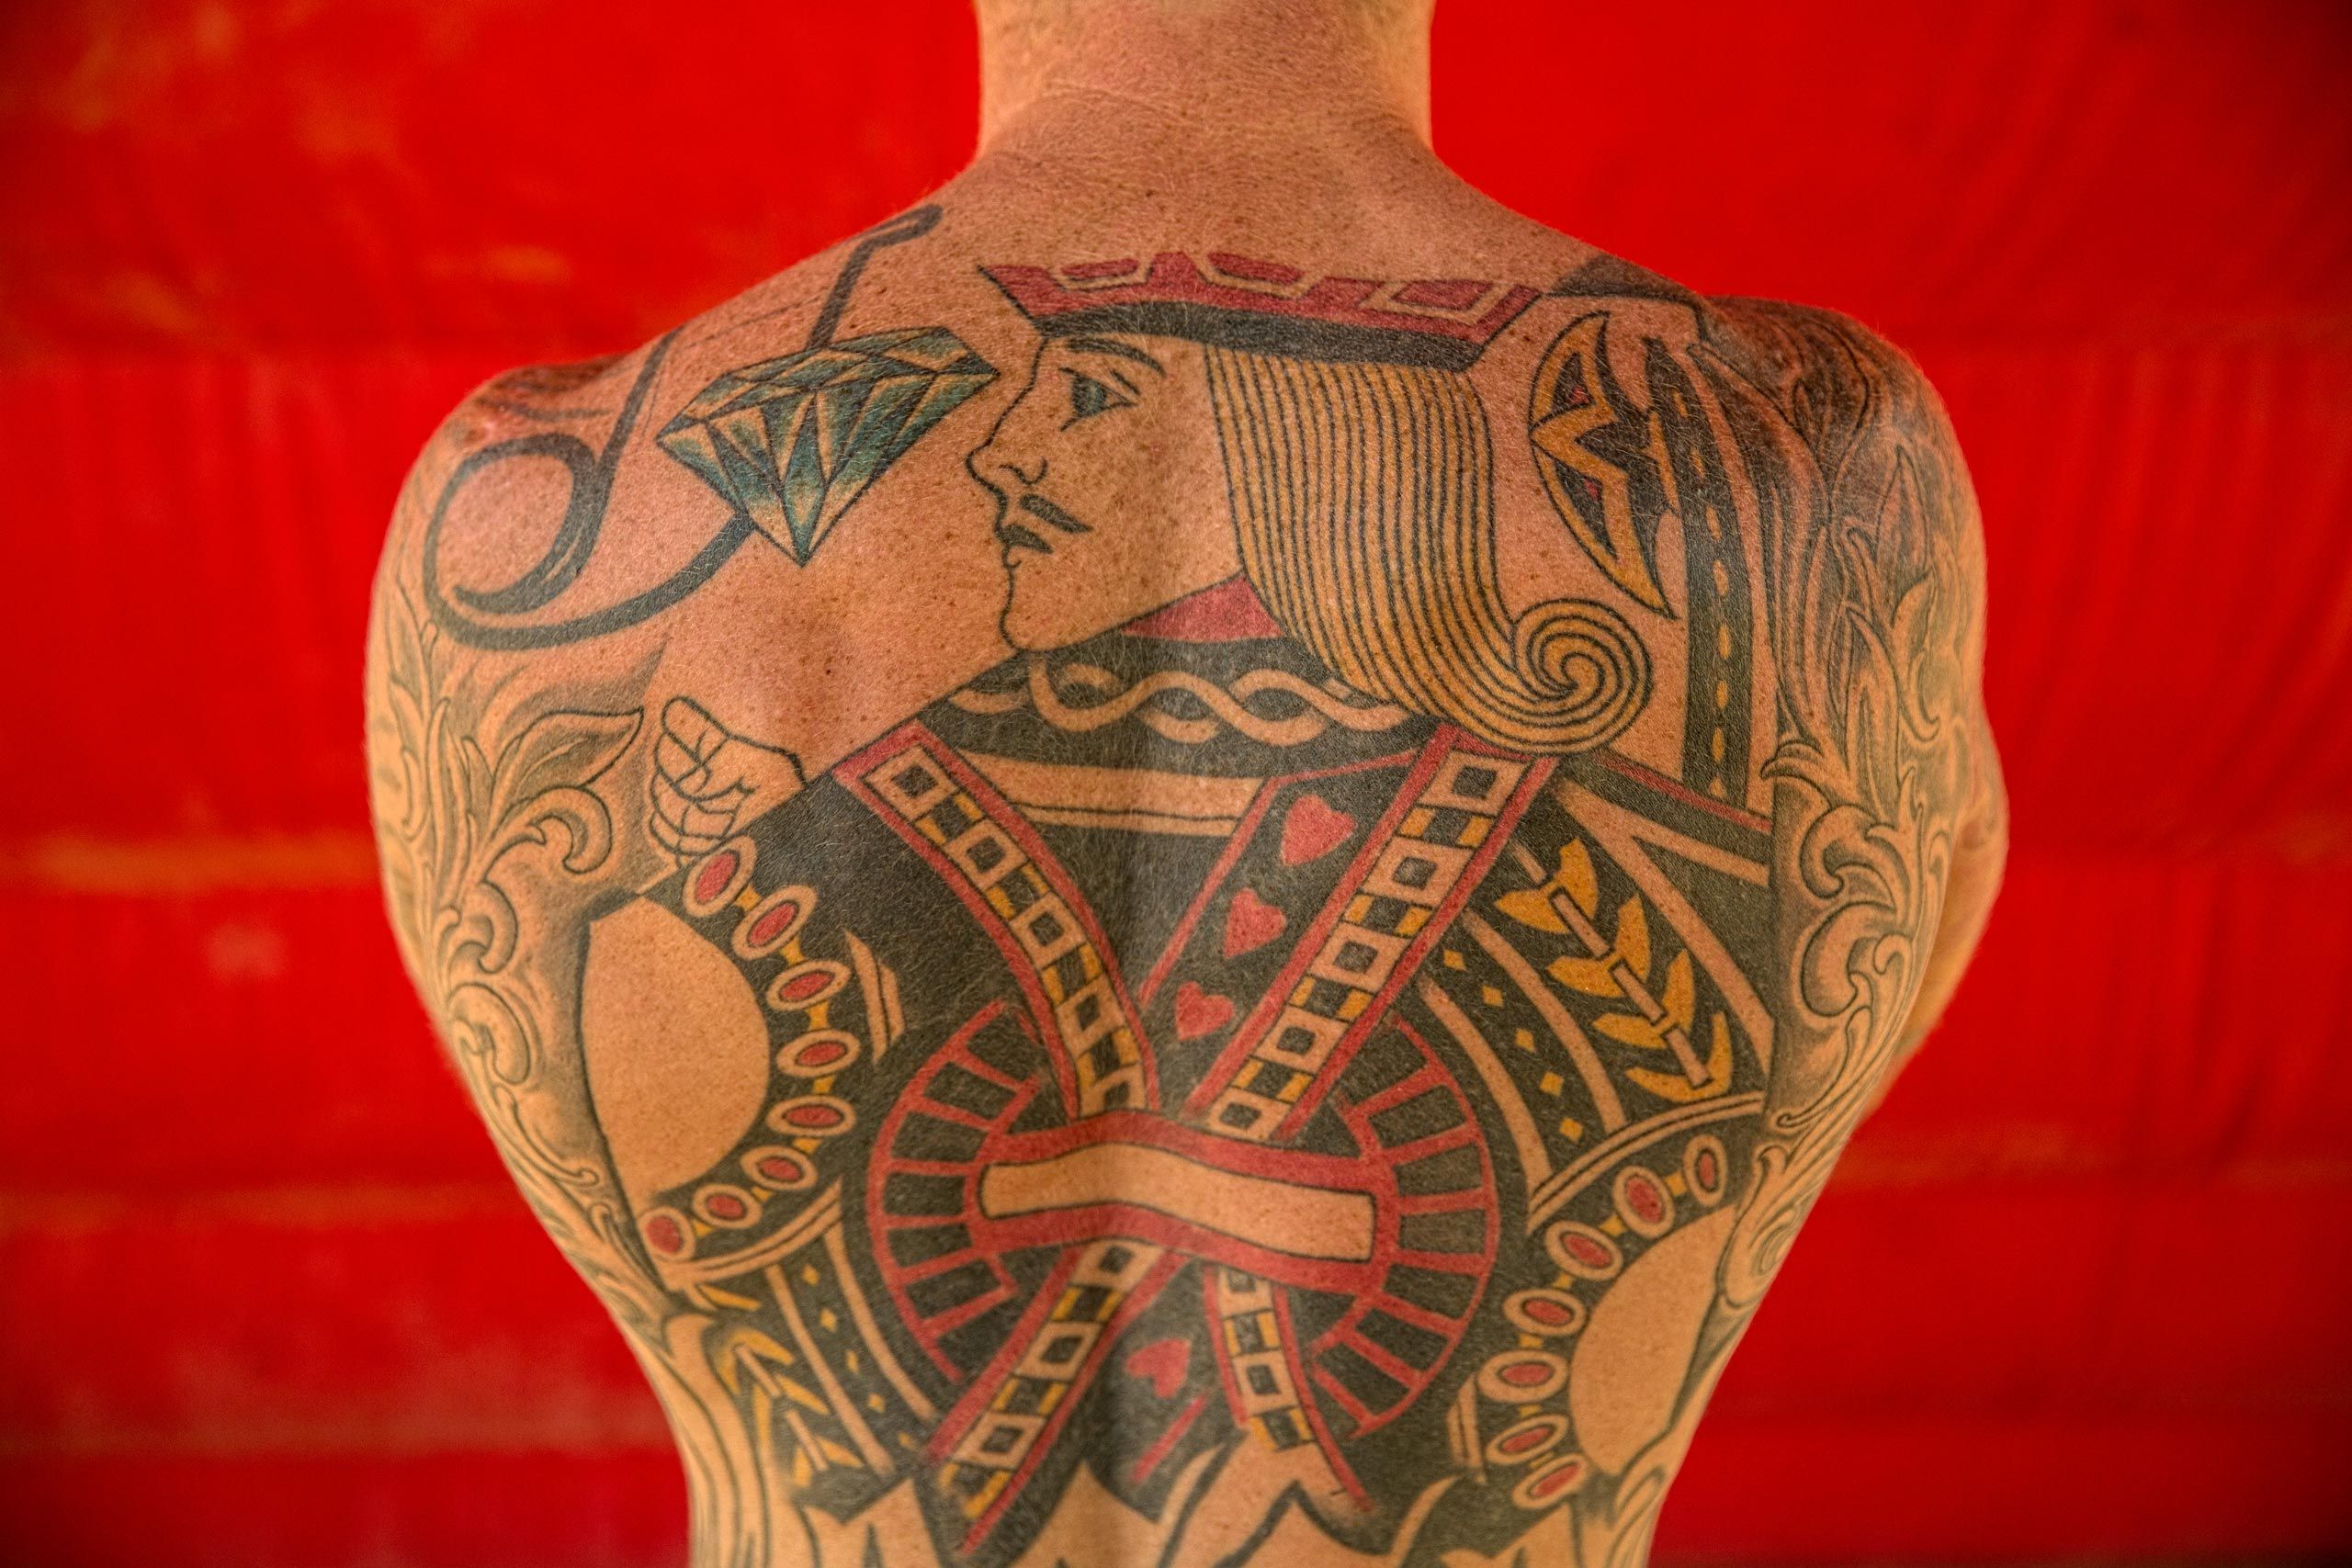 Portrait of a King of Hearts Tattoo on the Back of a Shirtless Man